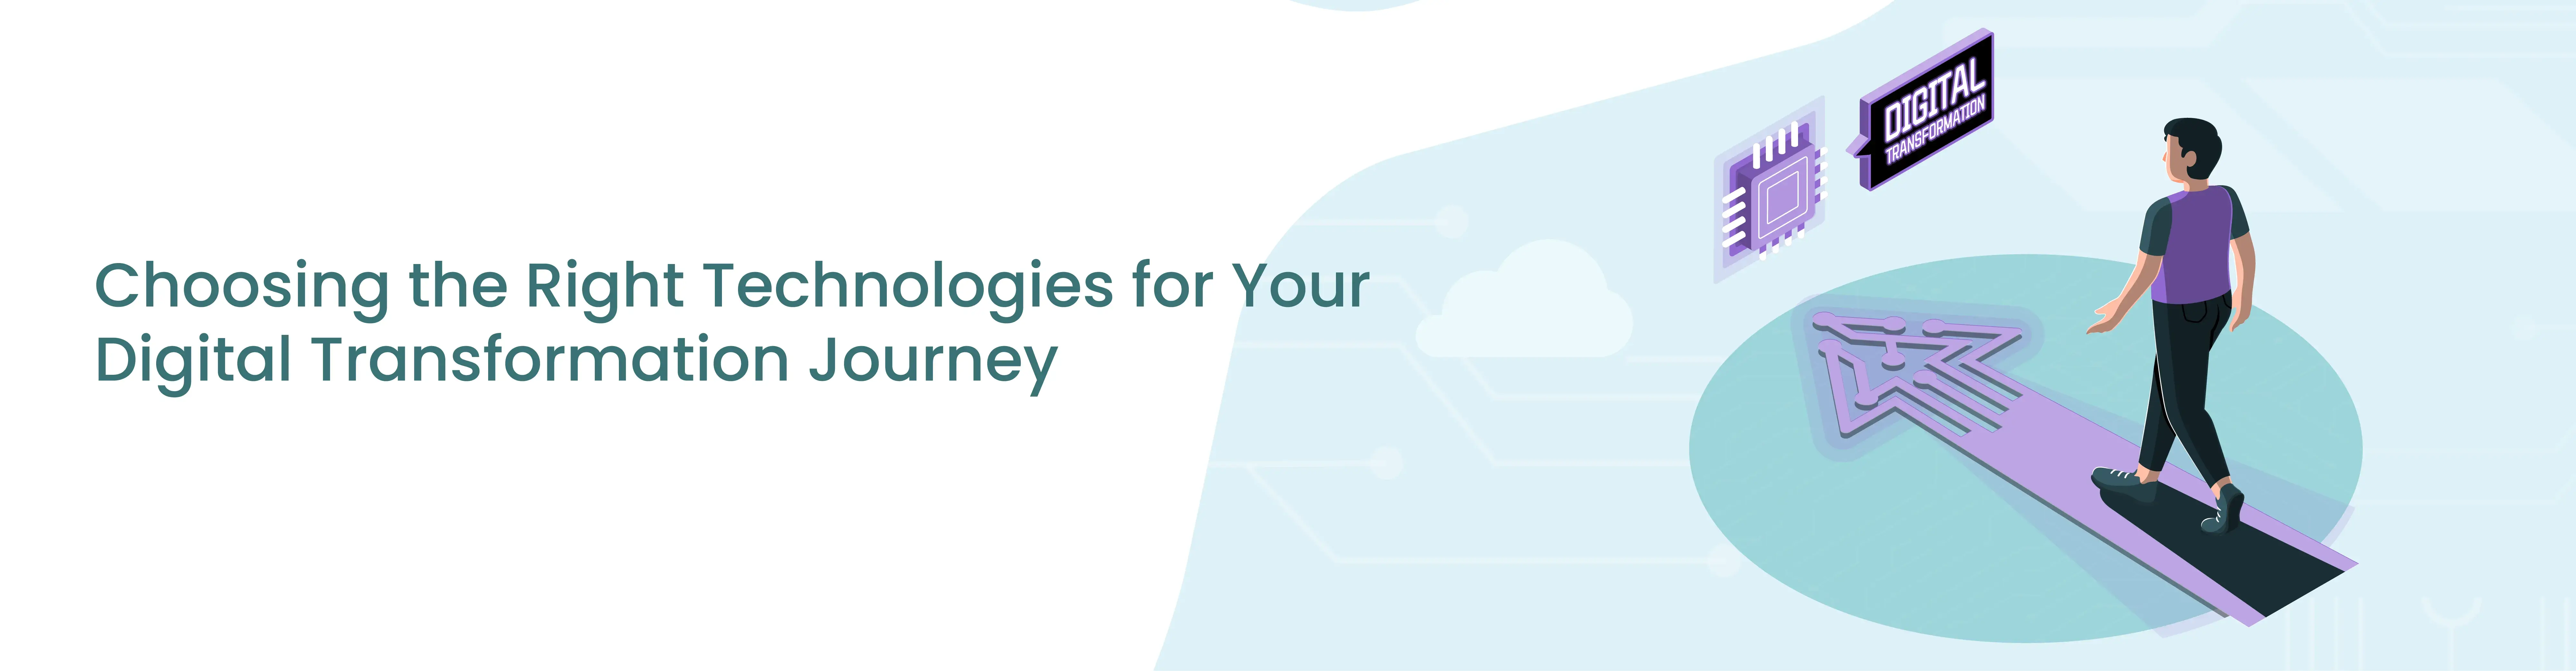 Choosing the Right Technologies for Your Digital Transformation Journey